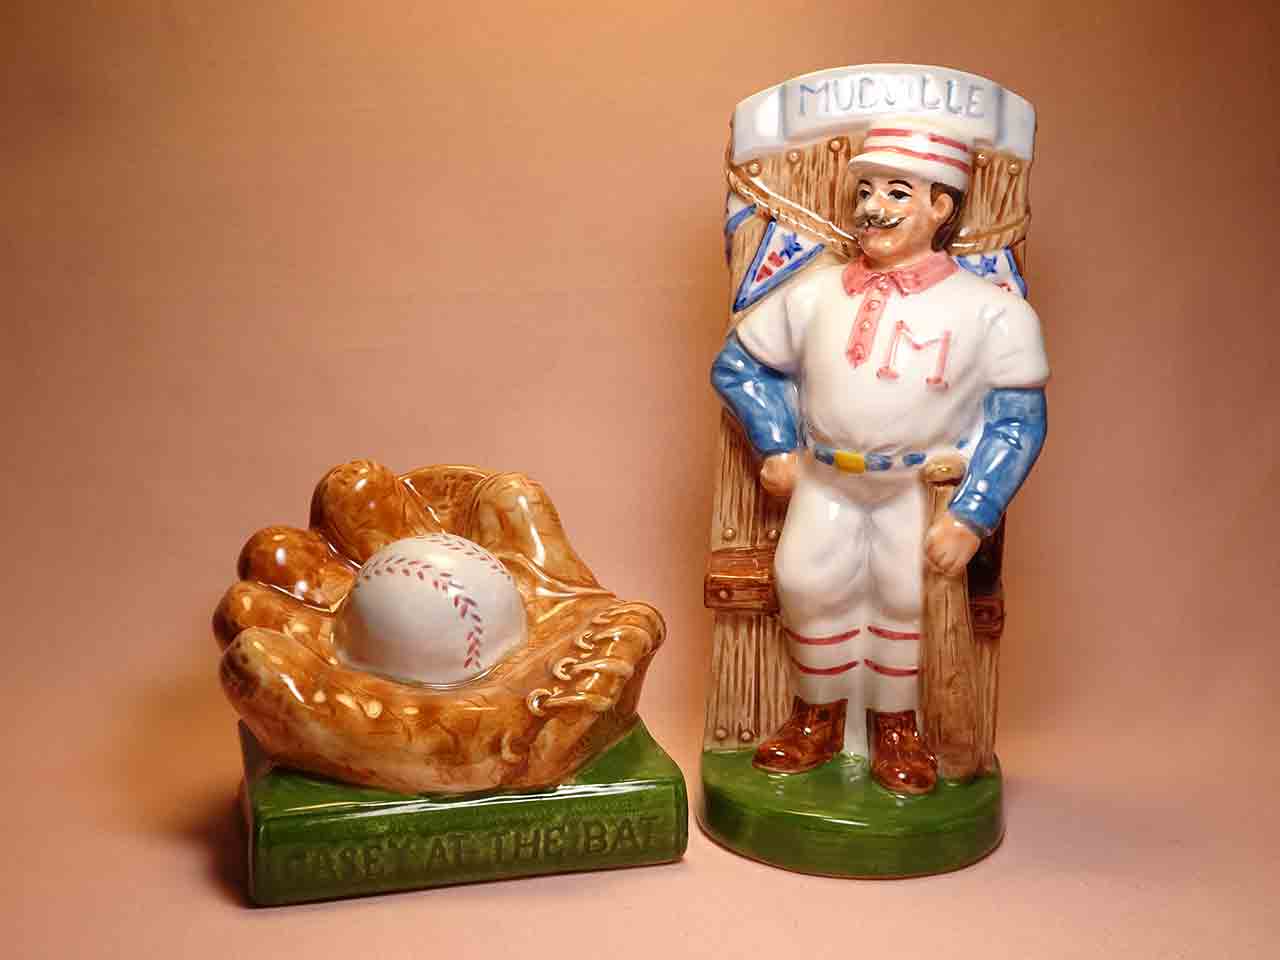 American Folklore series of salt and pepper shakers - Casey at the Bat